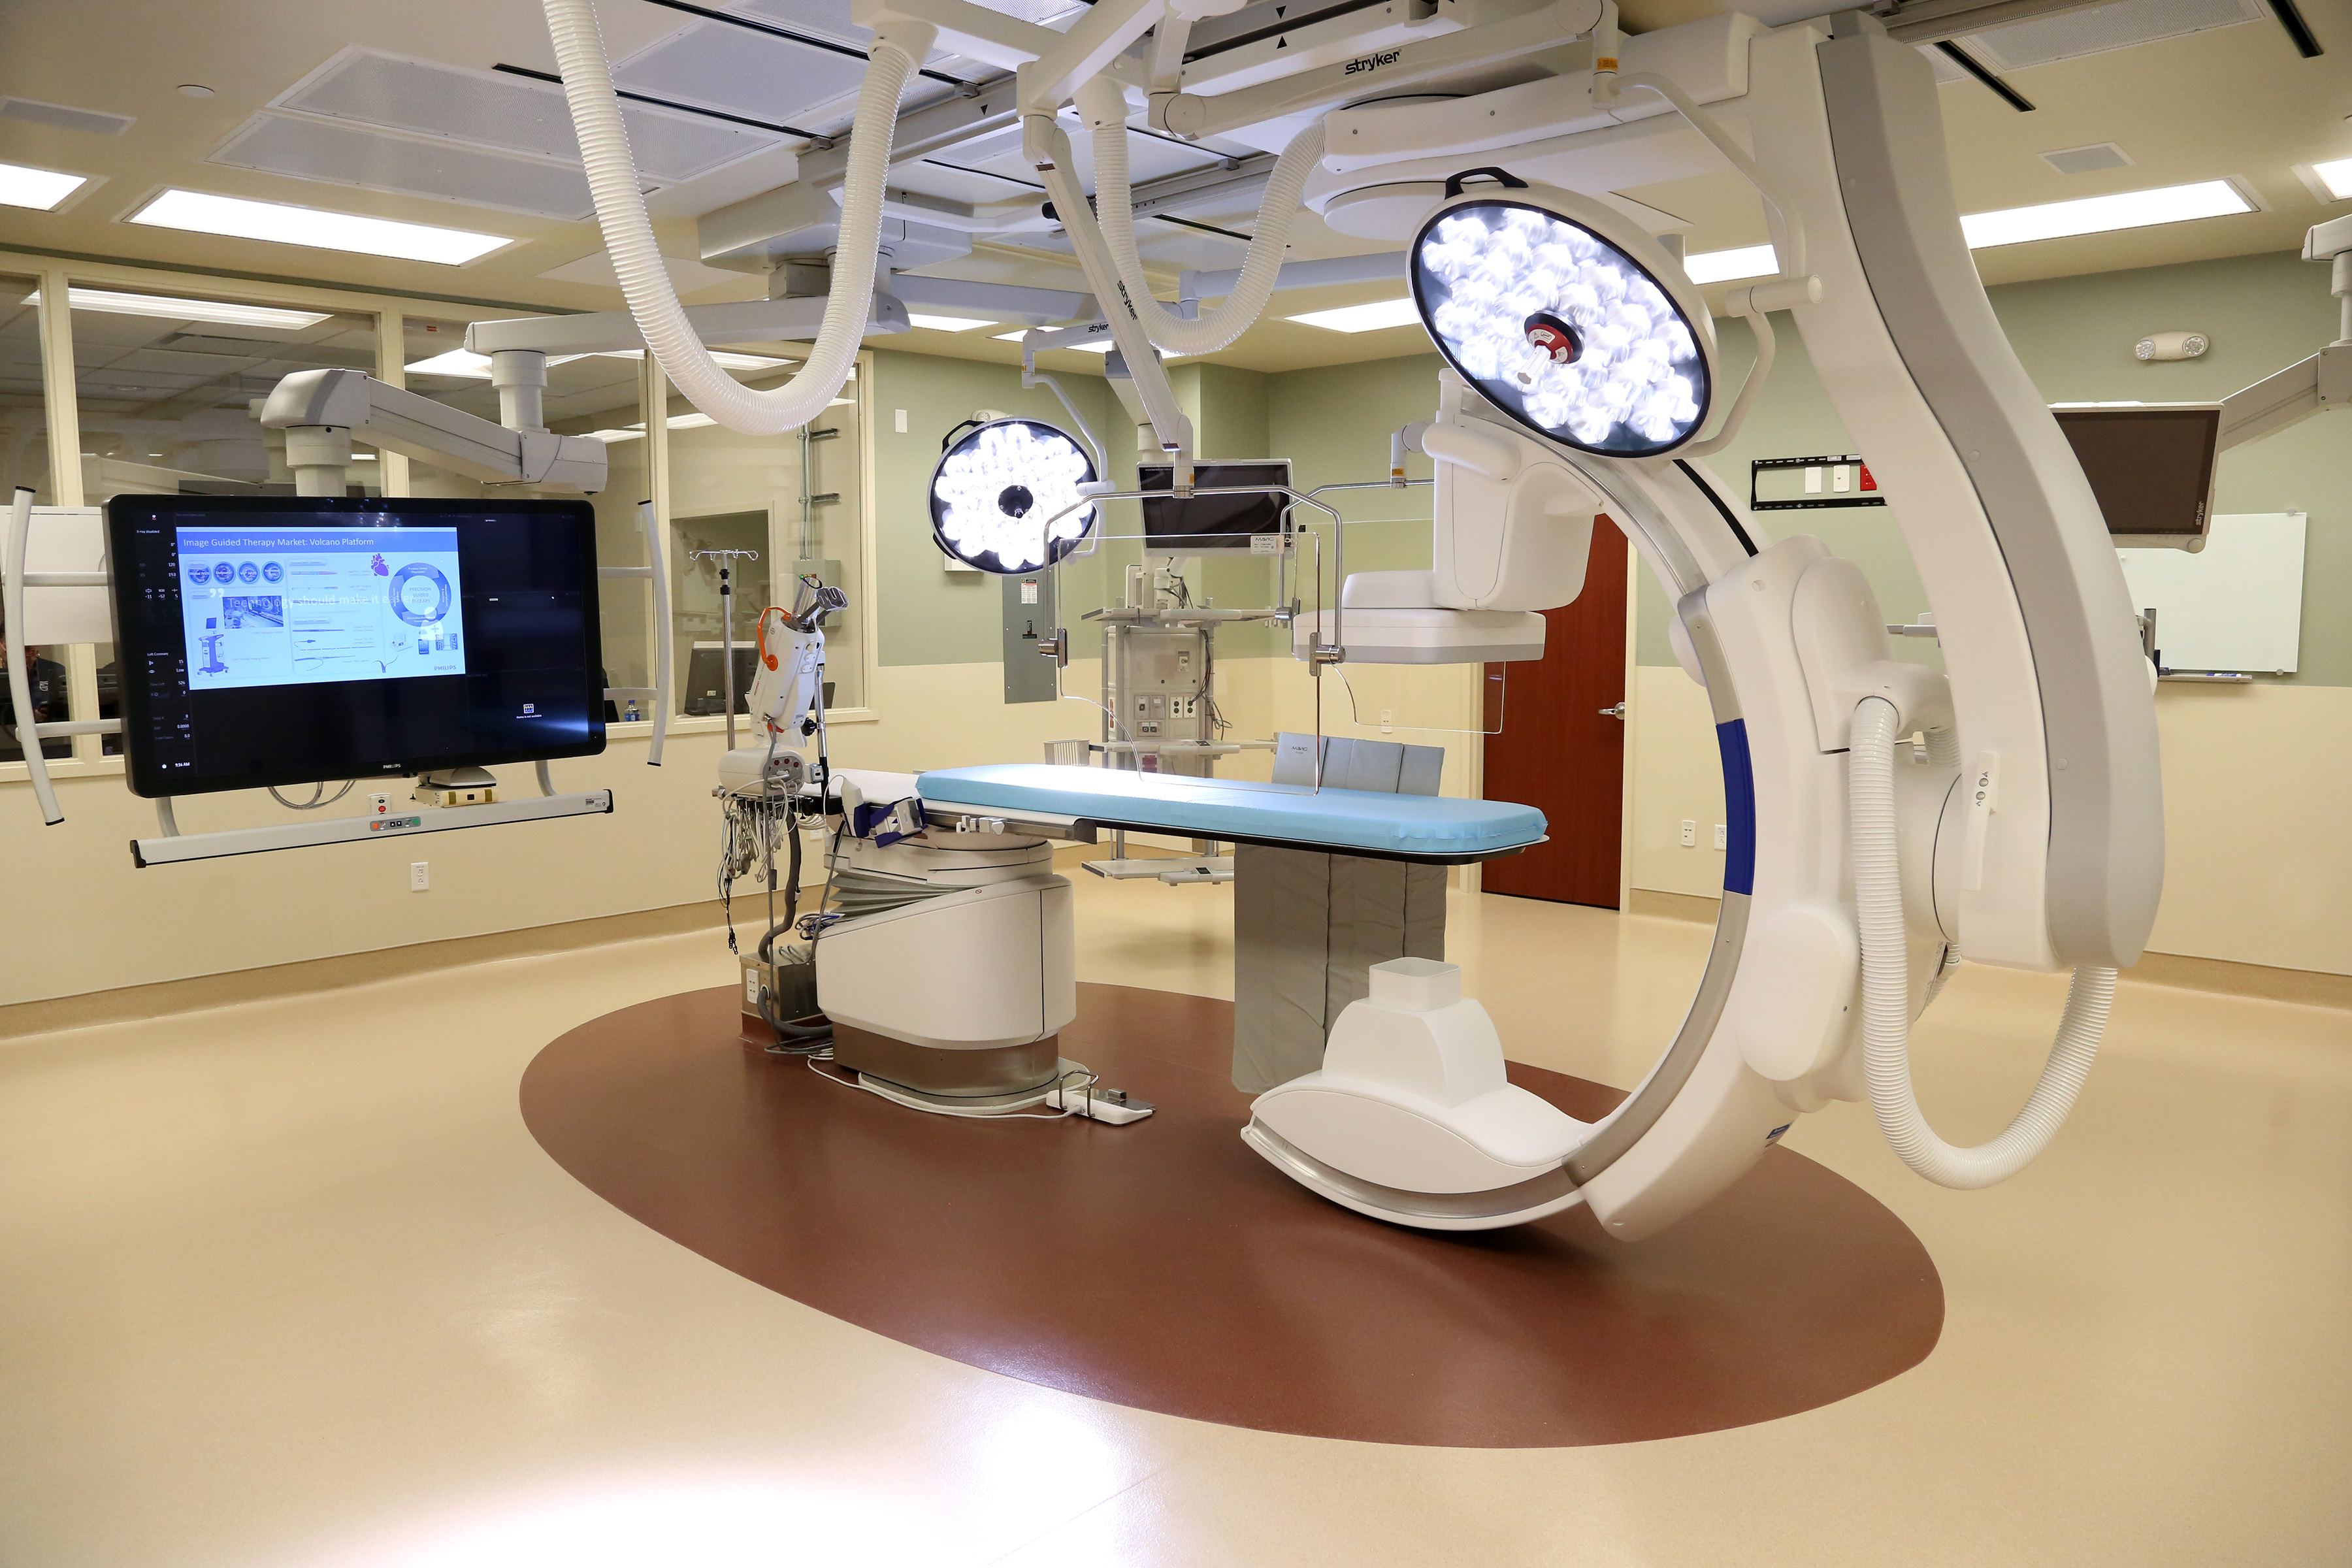 Florida Hospital Opens New Cath State of the Art Hybrid Cath Lab at its Carrollwood Location